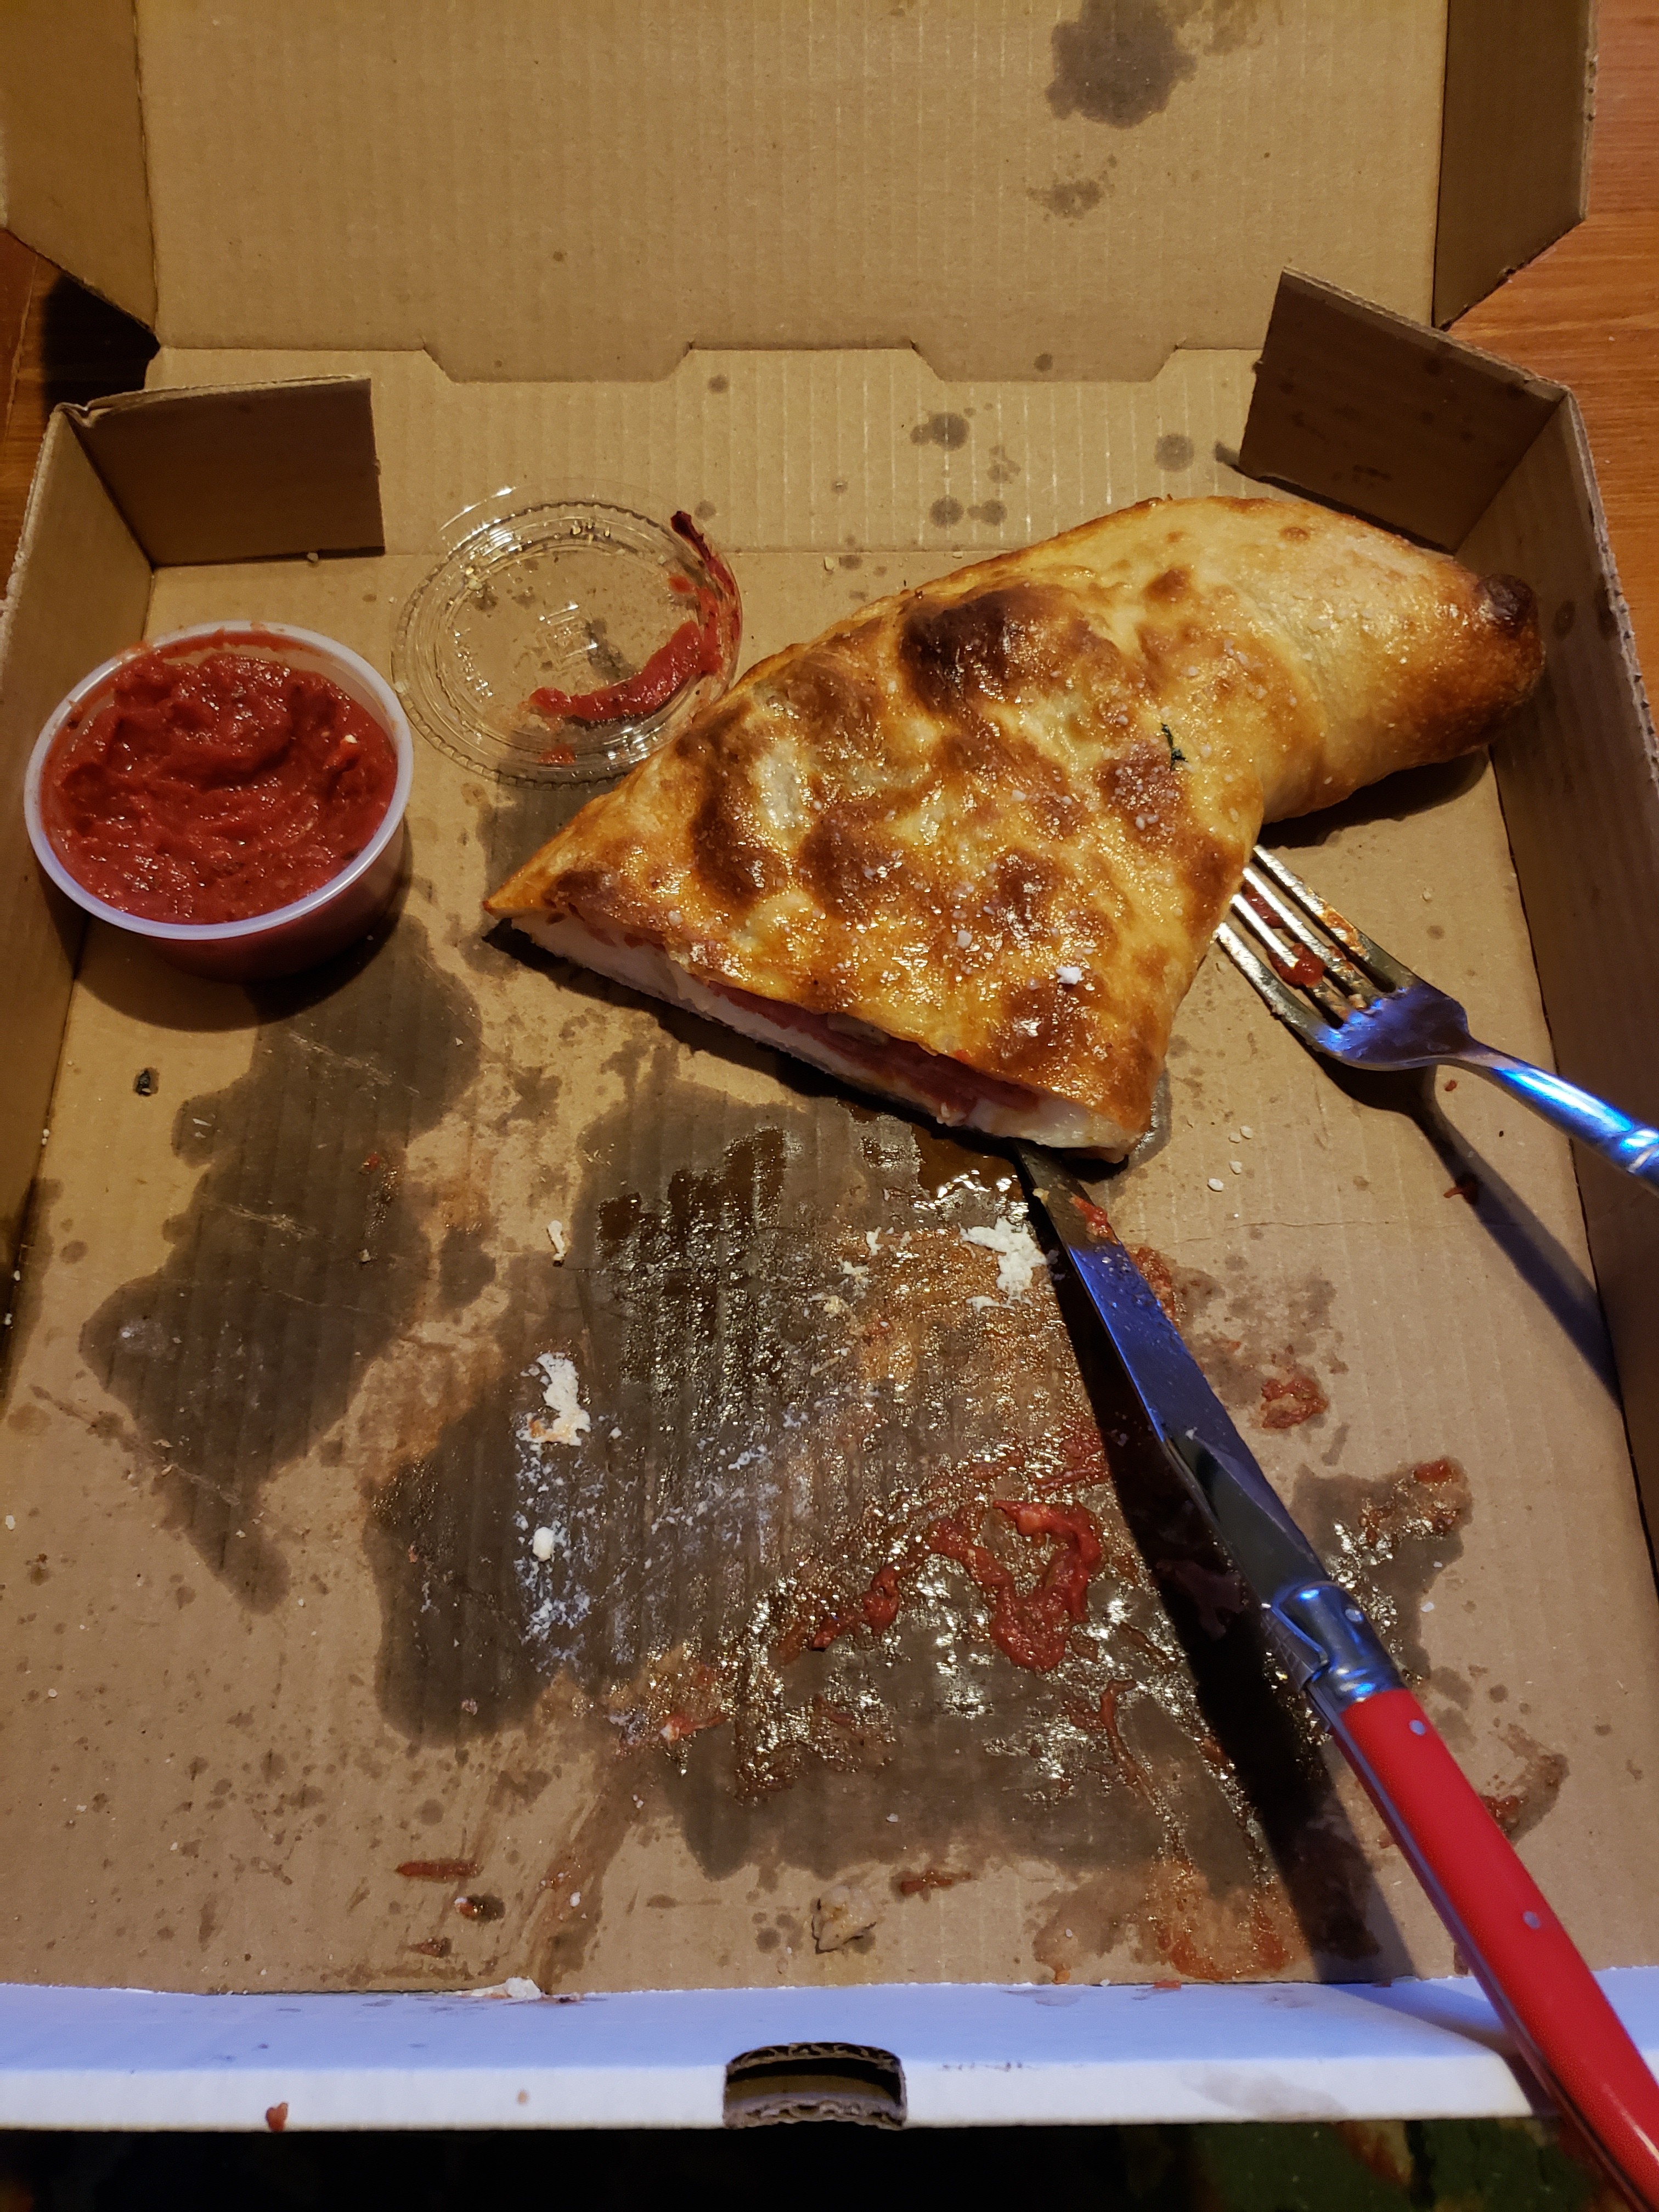 Calzones are better than pizza!